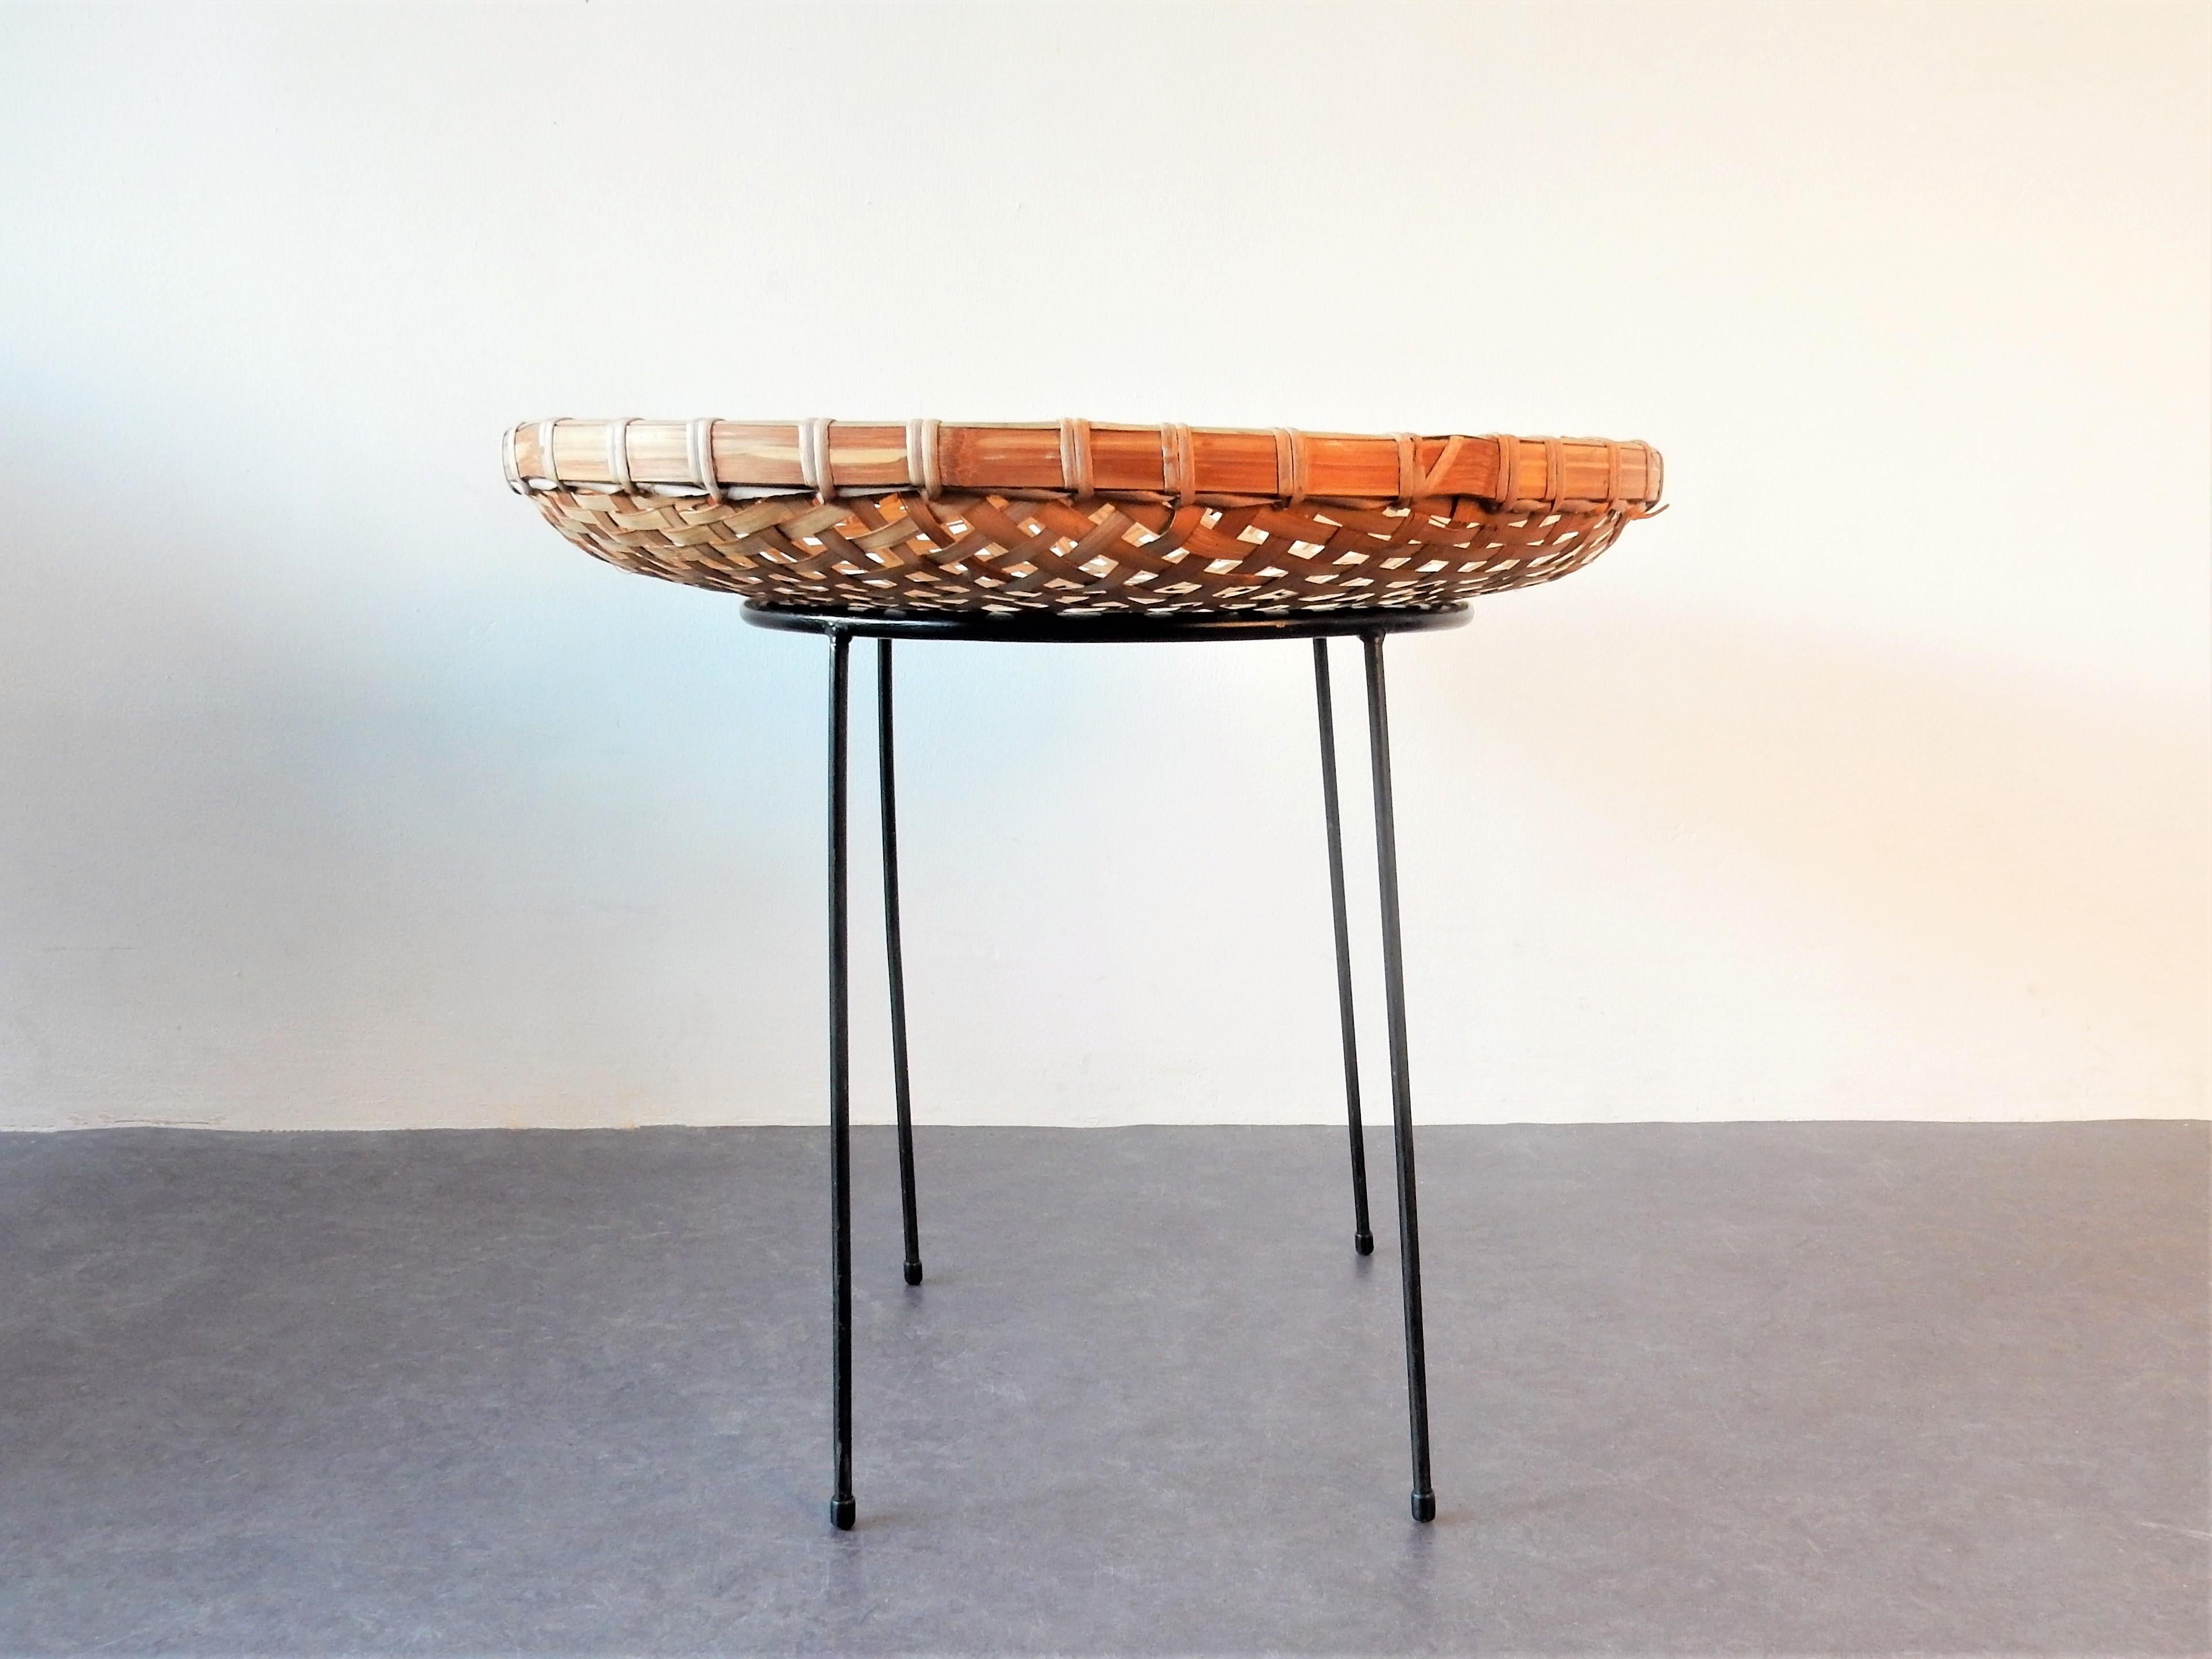 Mid-20th Century Rattan Bamboo Magazine Basket Stand by Artimeta, the Netherlands 1960s For Sale